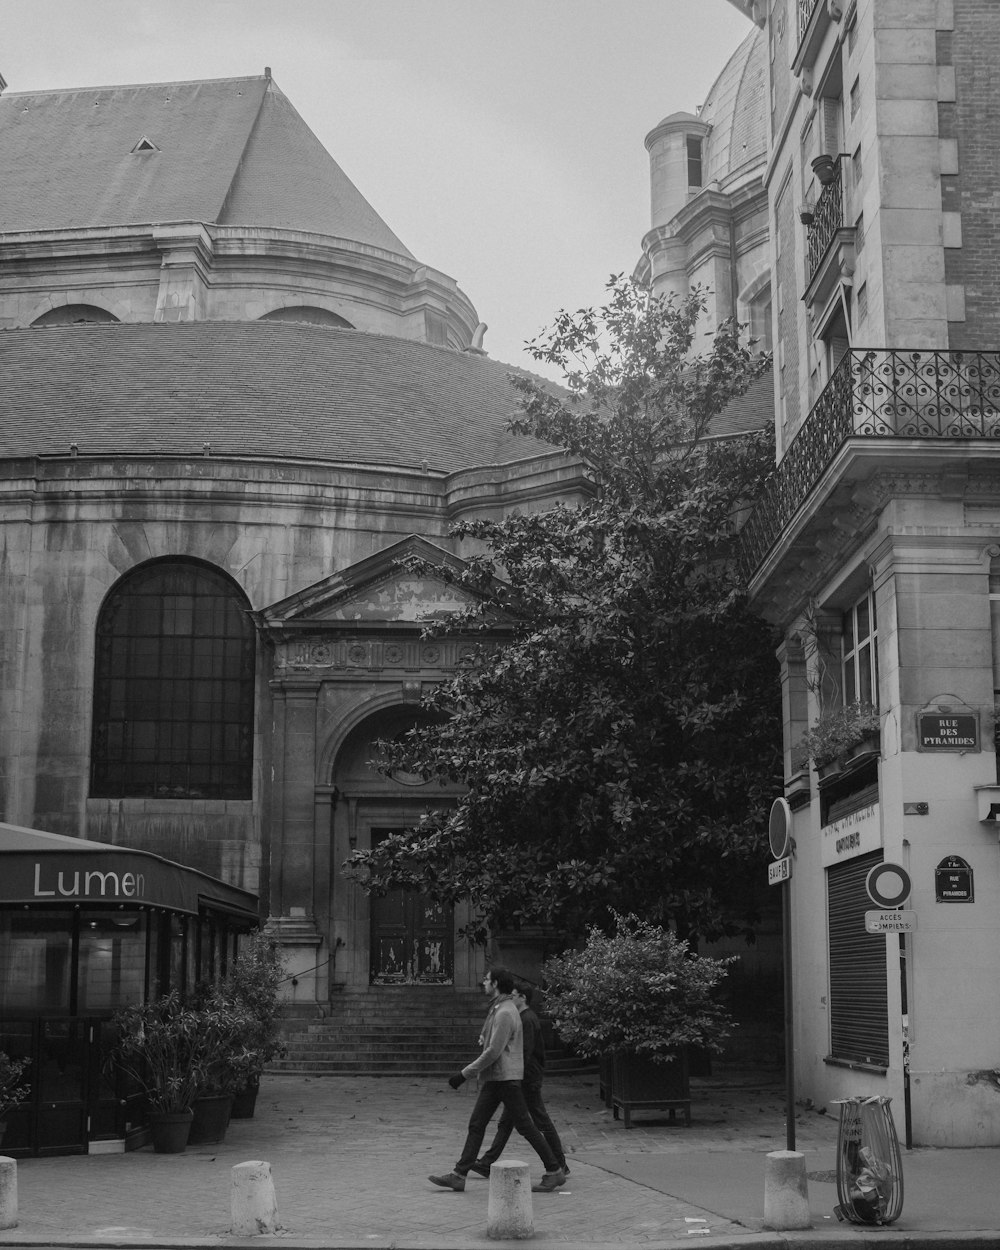 a black and white photo of a person walking in front of a building